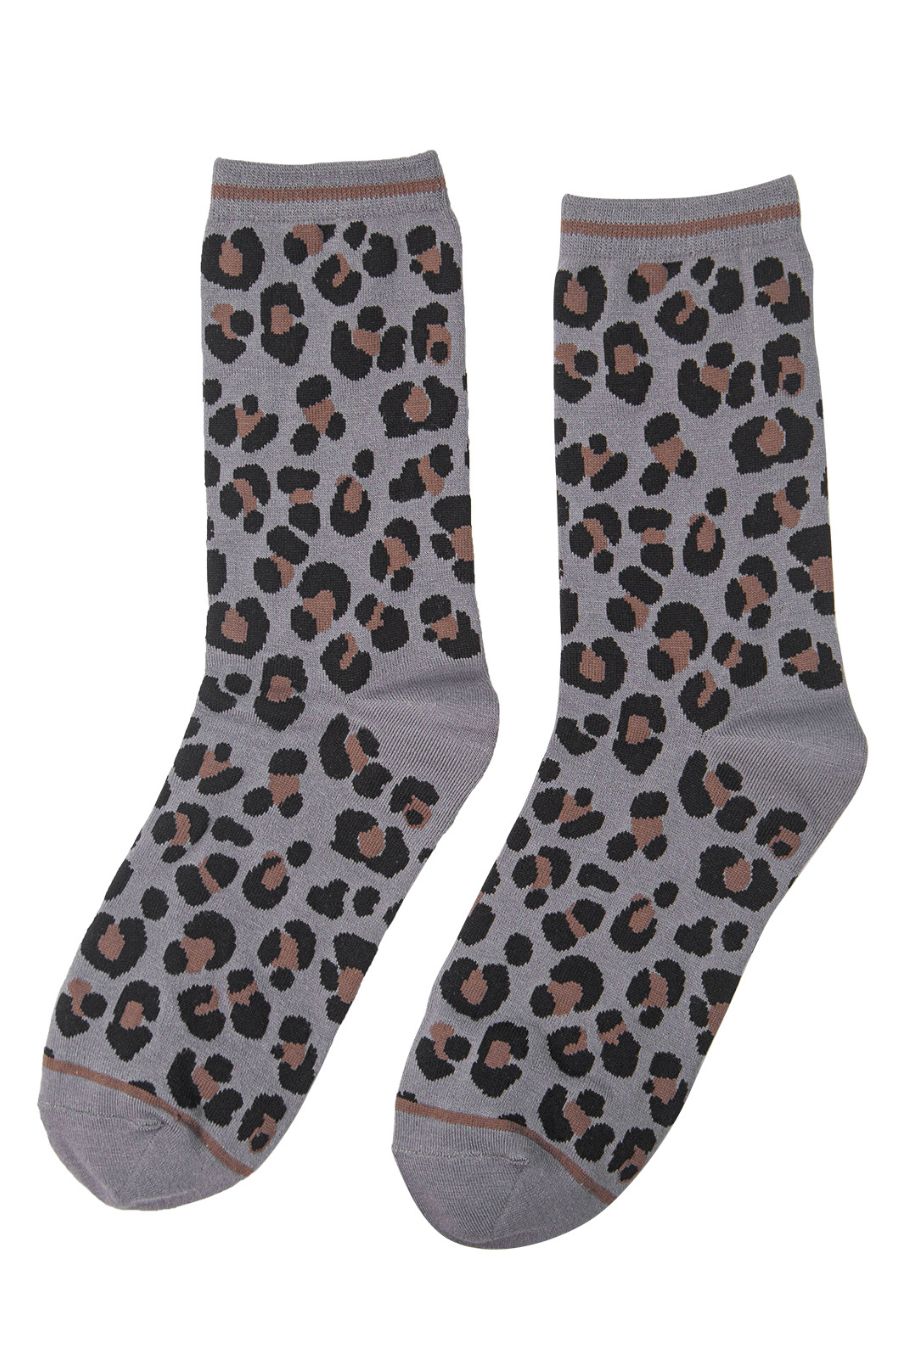 grey ankle socks with an all over brown and black animal print